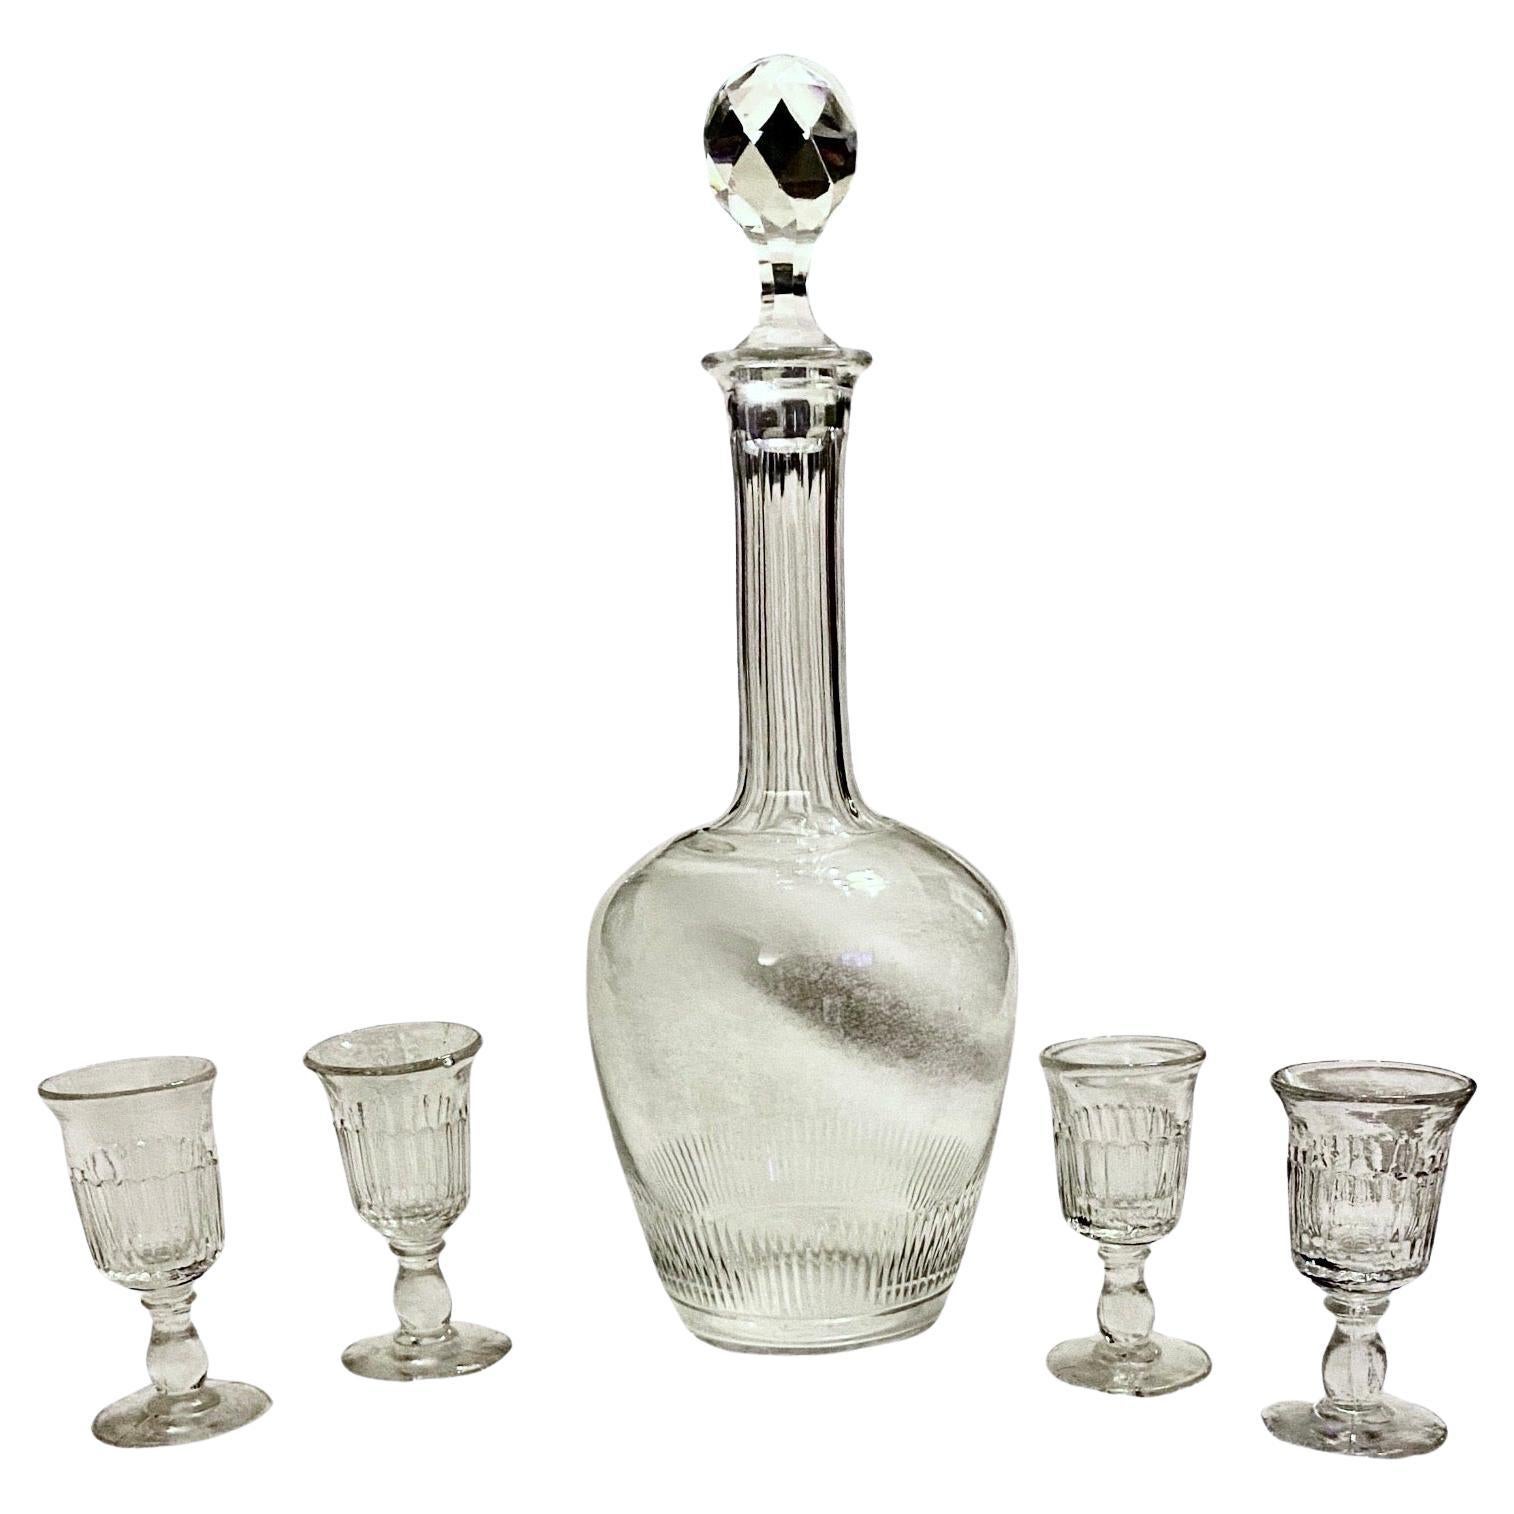 Reeded Glass Serveware, Ceramics, Silver and Glass